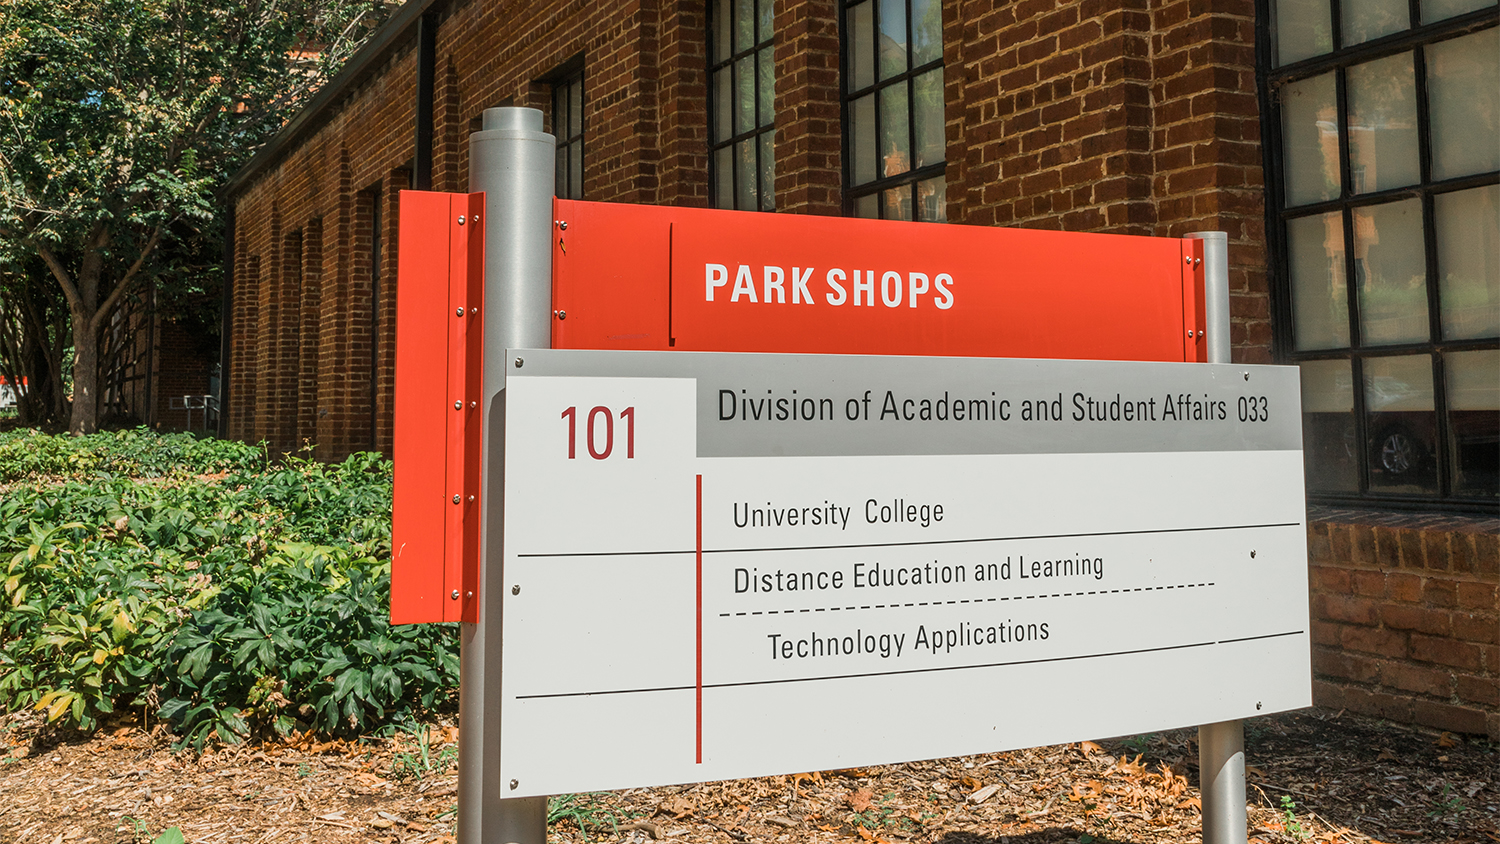 Sign for Park Shops and the Division of Academic and Student Affairs